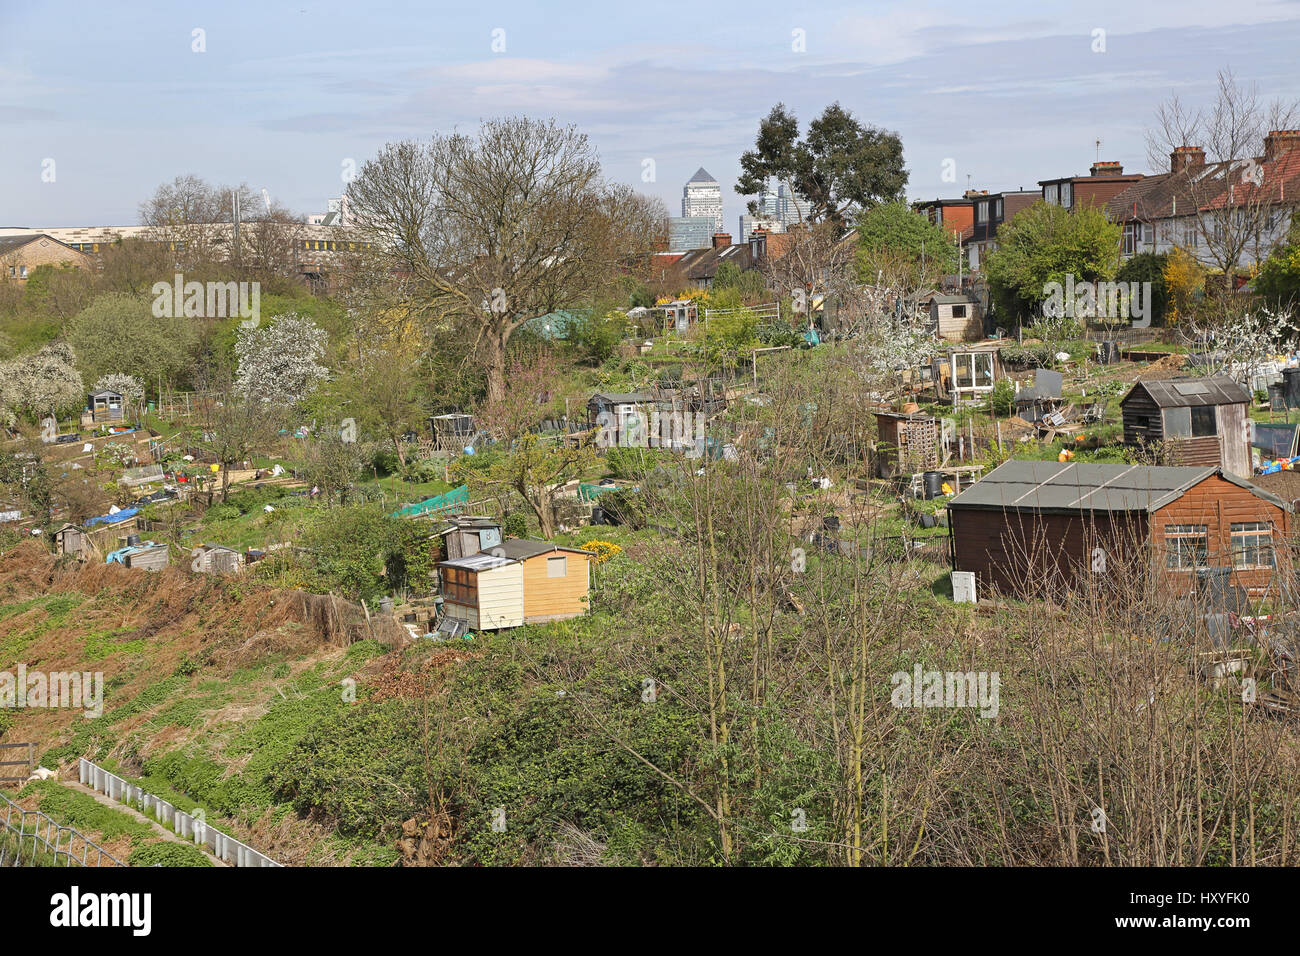 Public allotments next to the railway line in Brockley, southeast London where local residents grow fruit and vegetables. Shows Canary Wharf beyond. Stock Photo